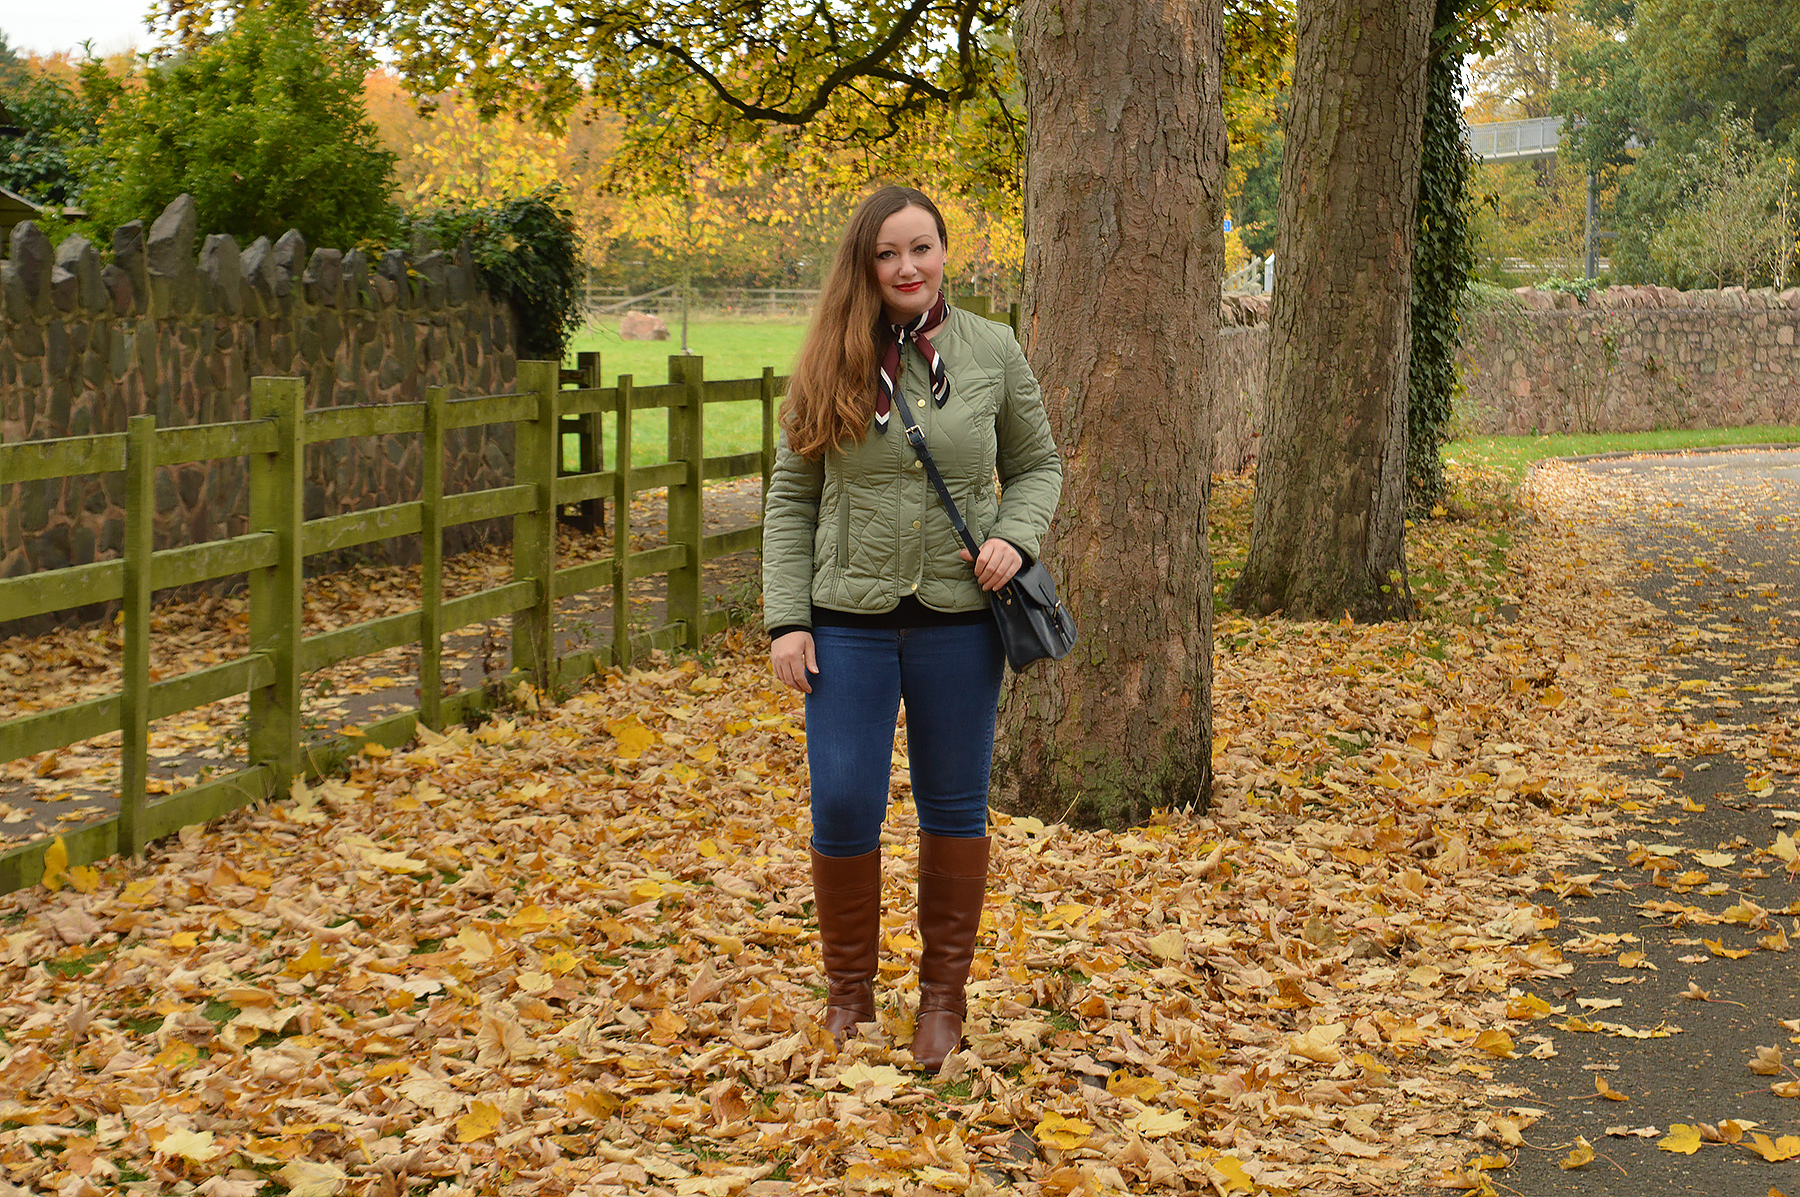 Joules Quilted Jacket Outfit